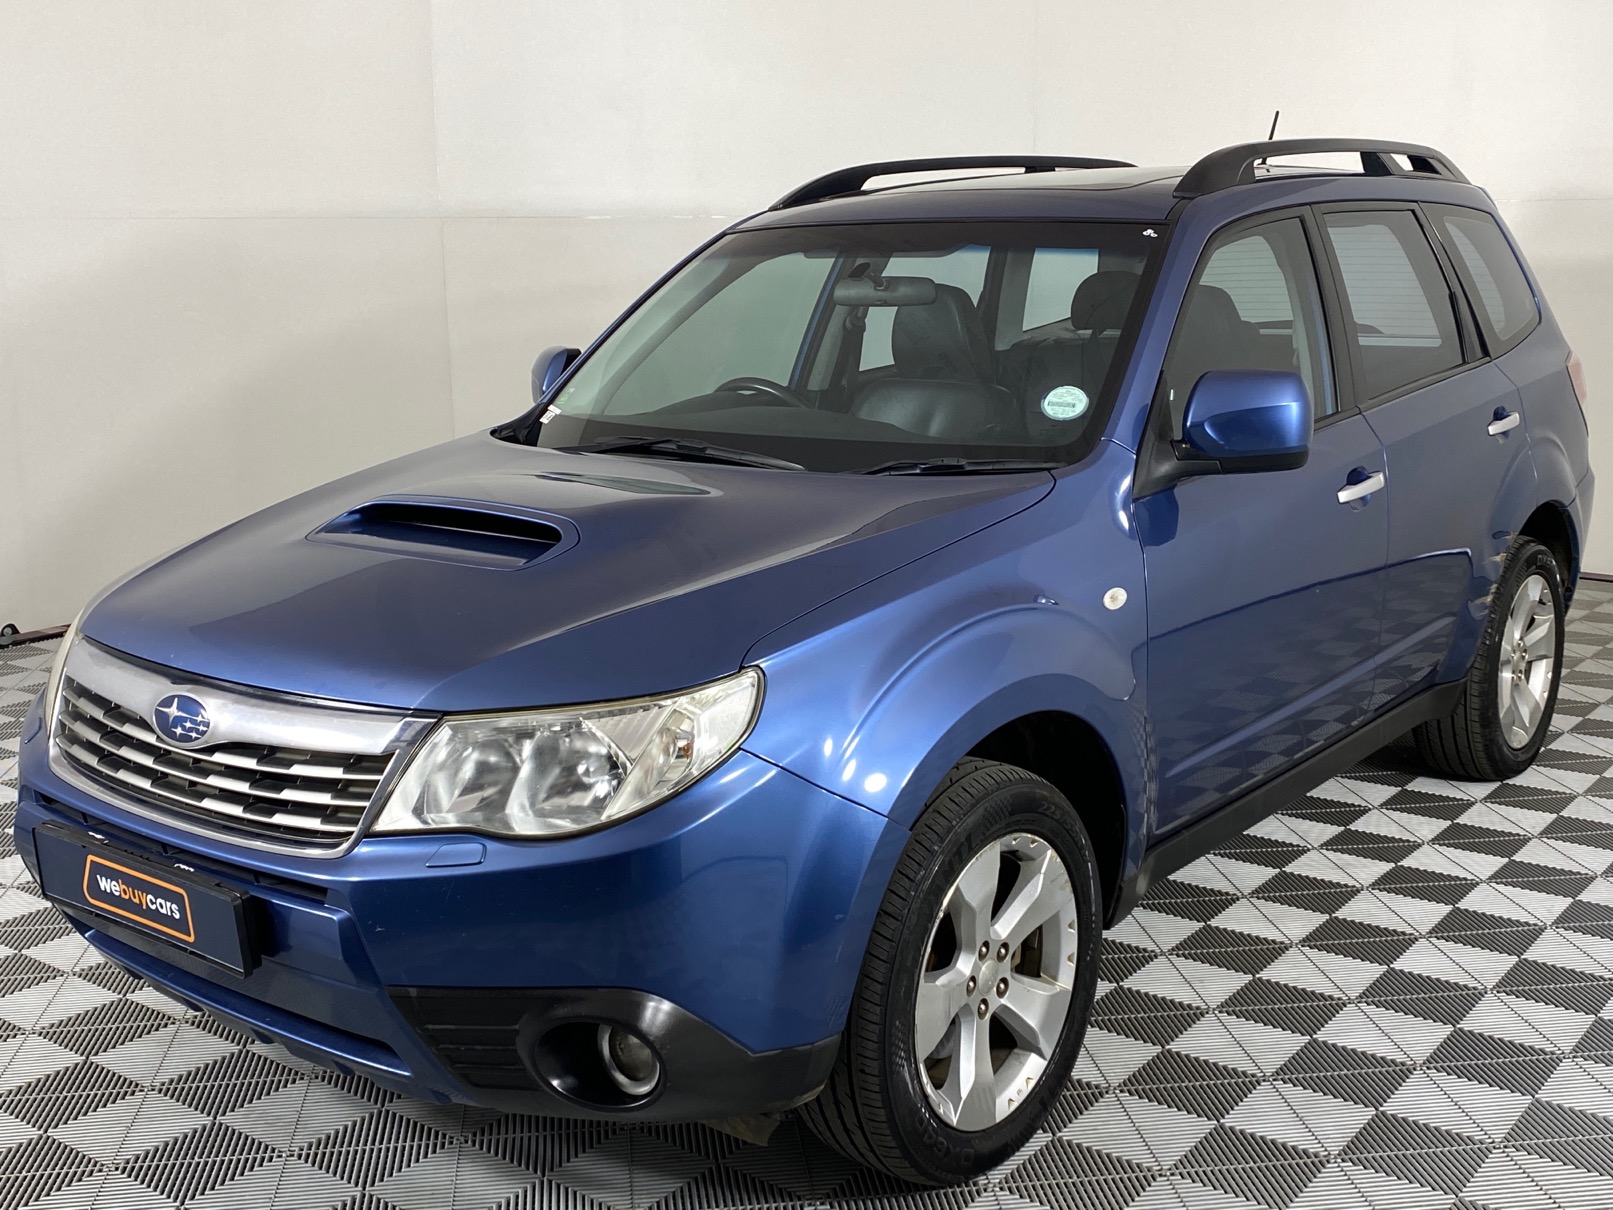 Used 2010 Subaru Forester 2.5 XS Auto for sale WeBuyCars